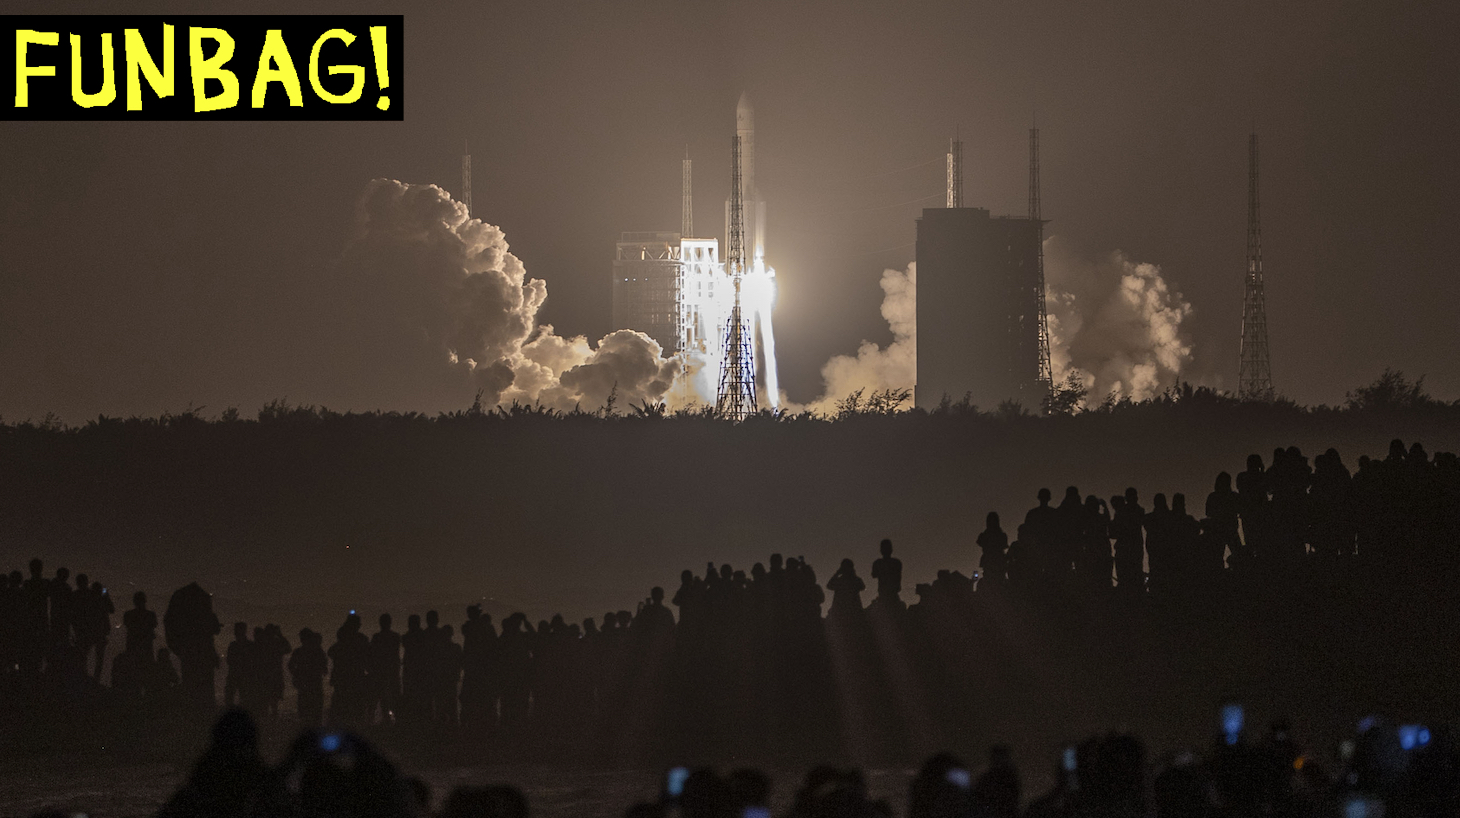 A Long March 5 rocket carrying China's Chang'e-5 lunar probe launches from the Wenchang Space Center on China's southern Hainan Island on November 24, 2020, on a mission to bring back lunar rocks, the first attempt by any nation to retrieve samples from the moon in four decades. - (Photo by STR / AFP) / China OUT (Photo by STR/AFP via Getty Images)